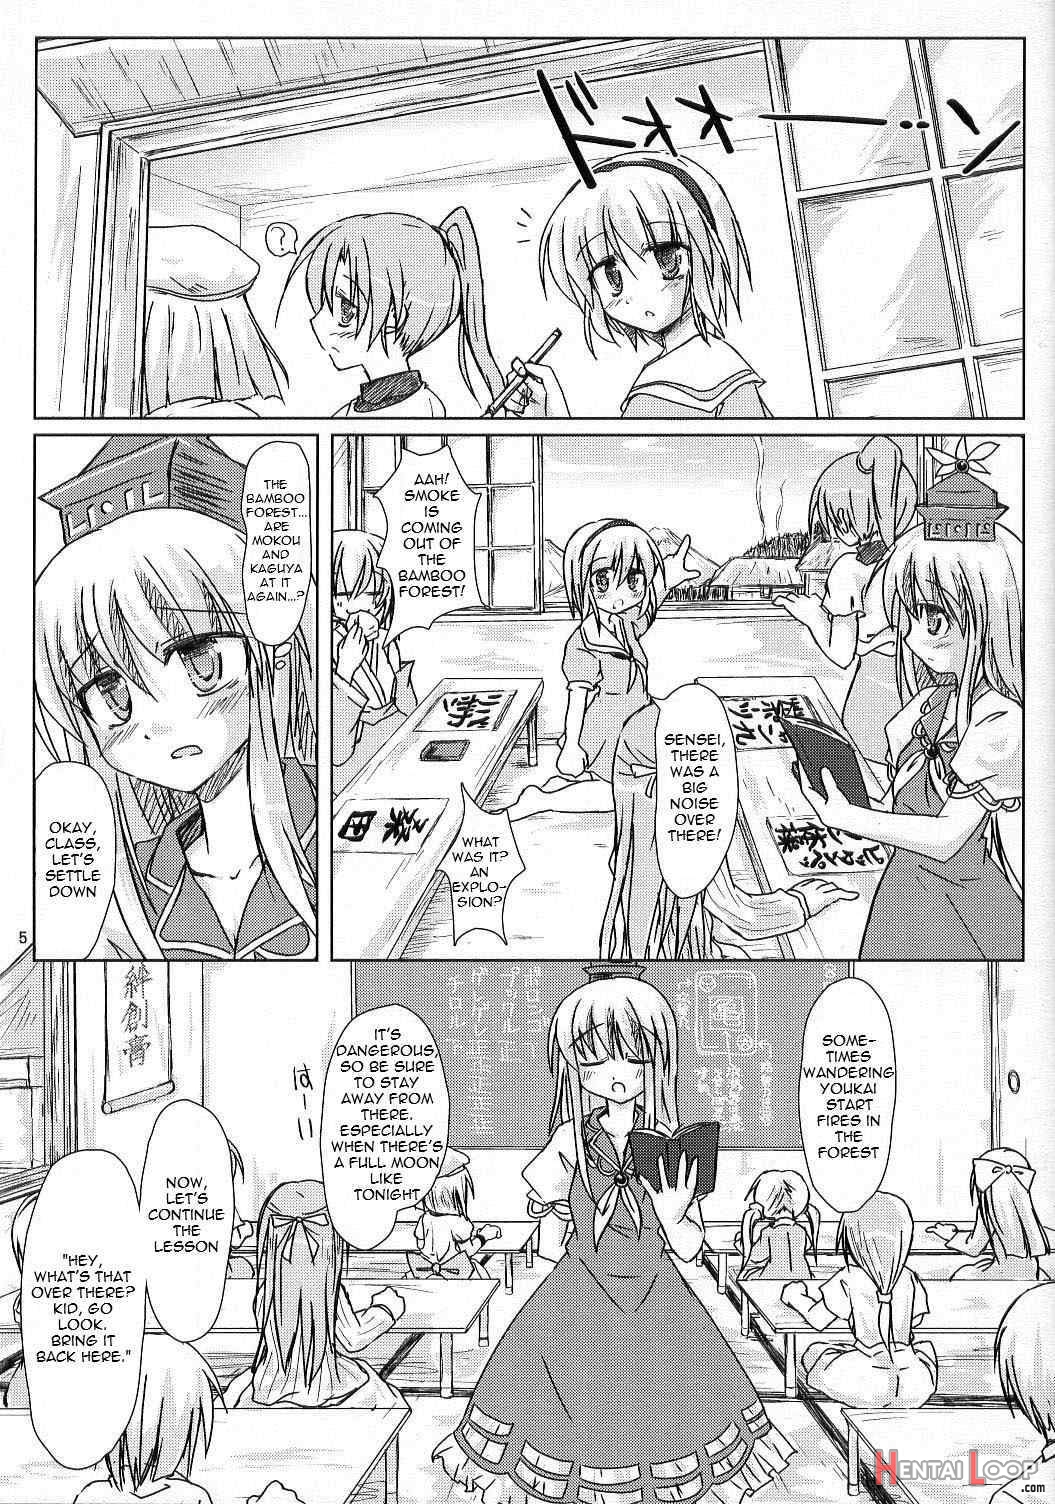 Hourai Geppei page 2